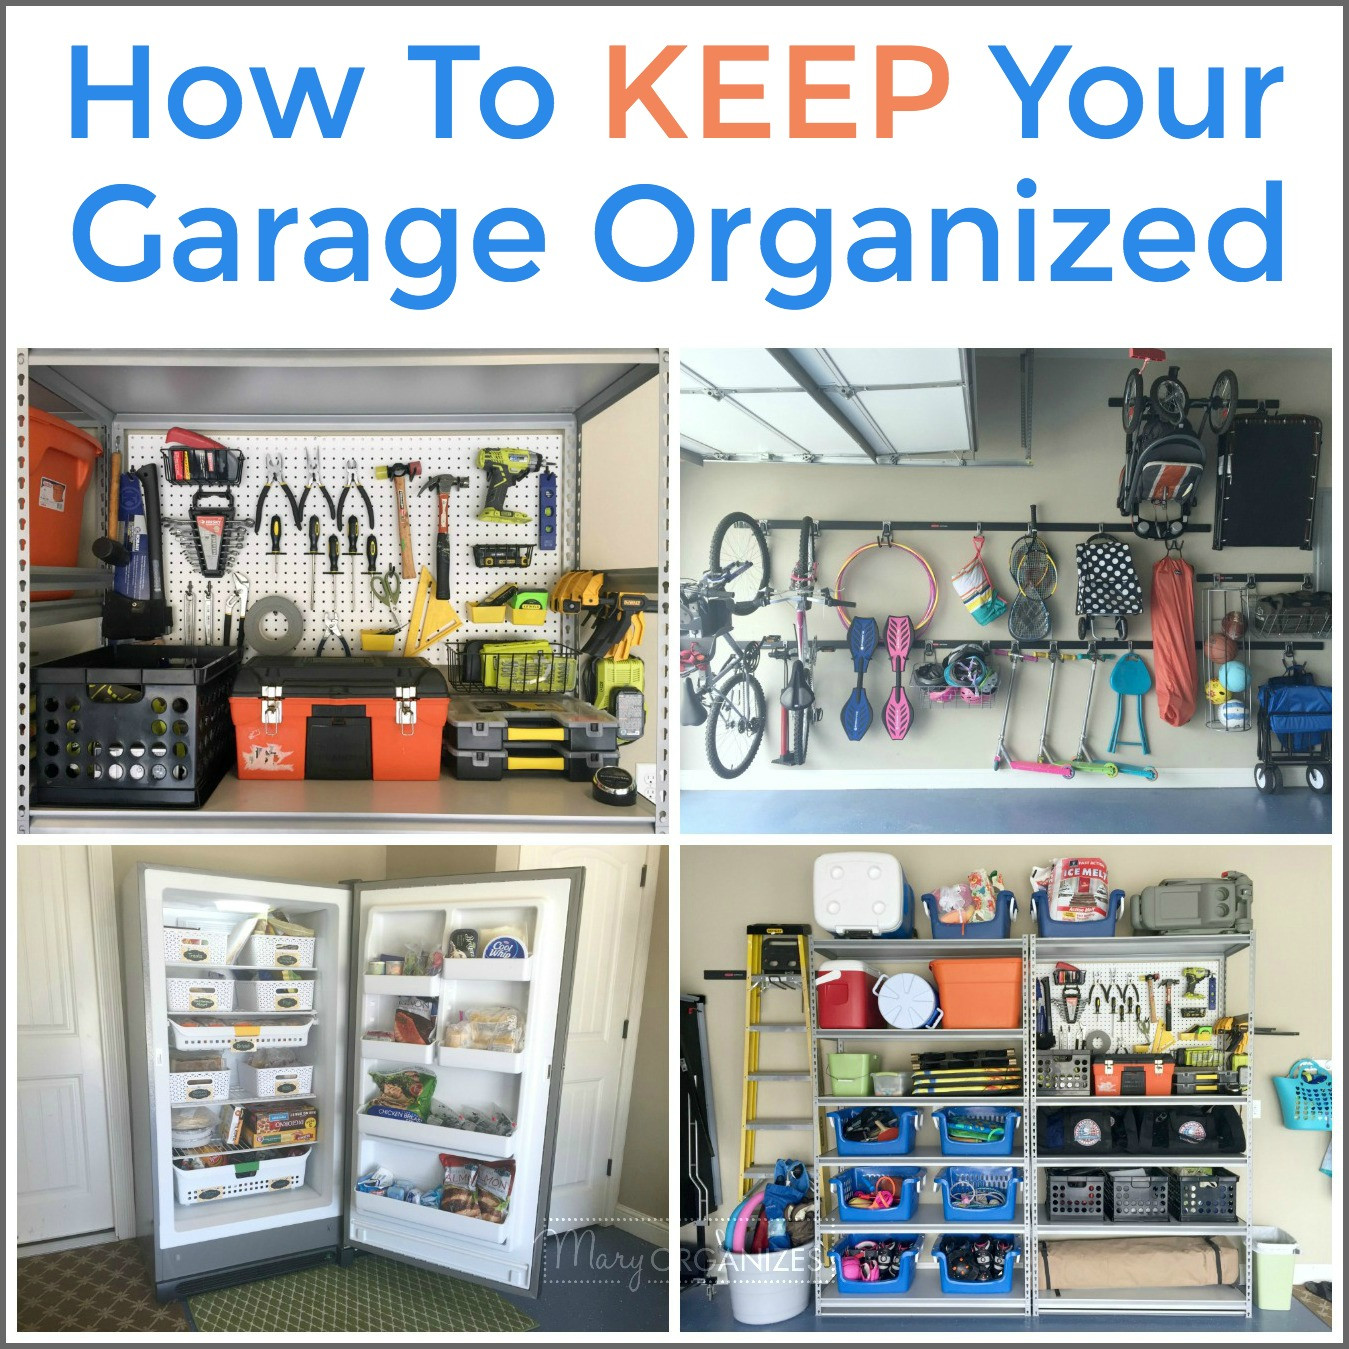 Organizing Your Garage
 Organize Your Garage ONE WEEK All About The Garage